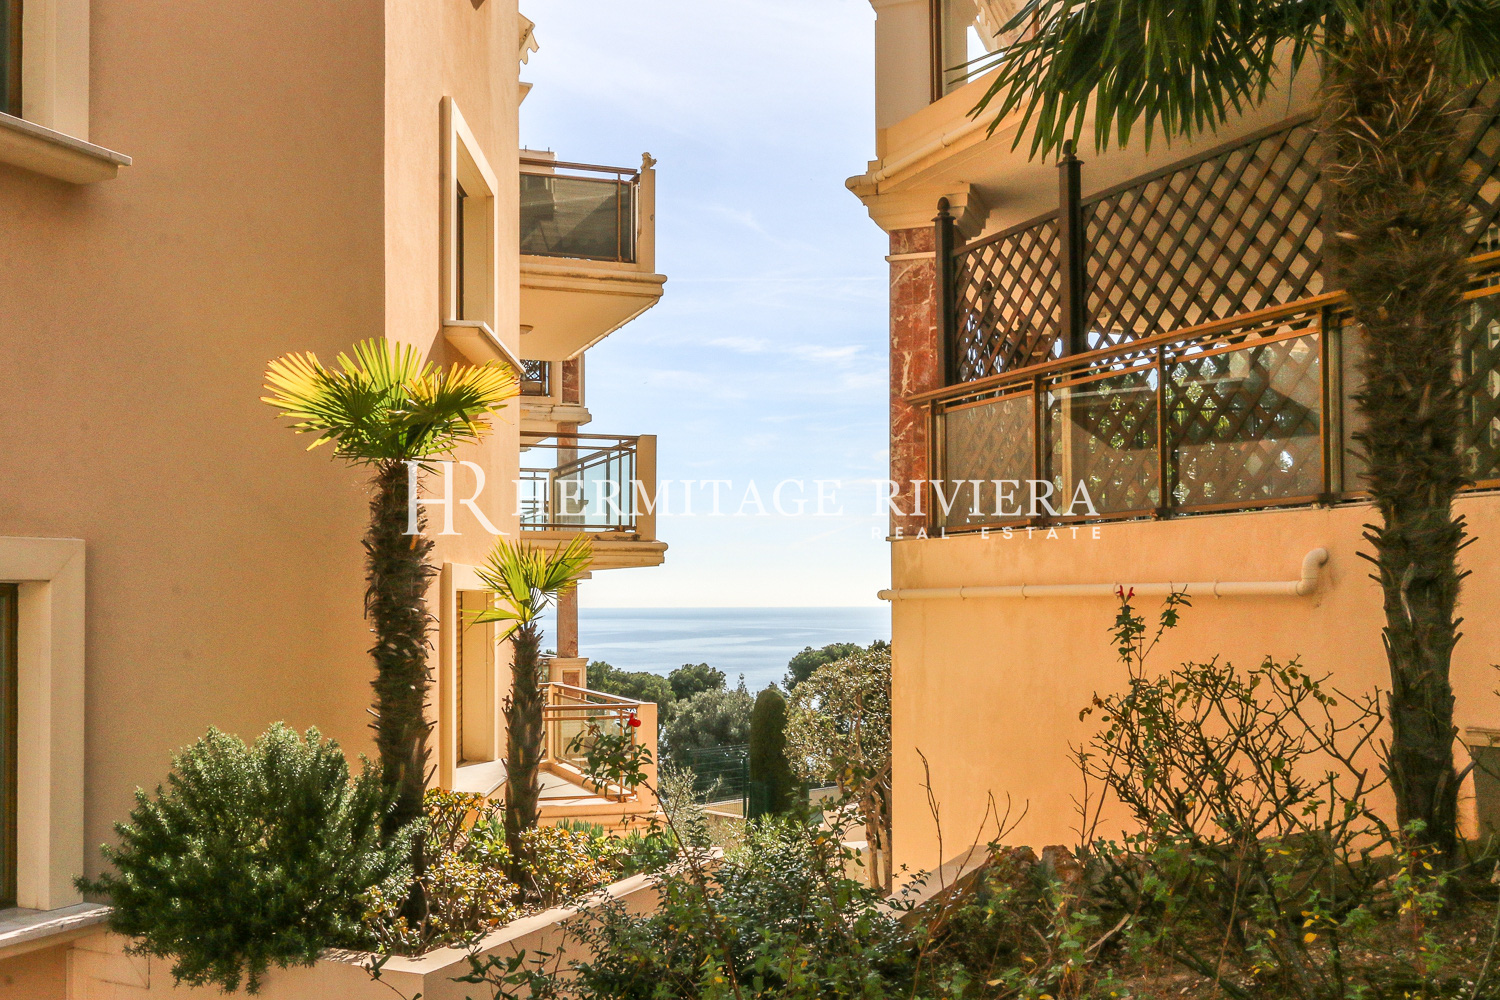 Apartment to renovate with views over Monaco (image 6)